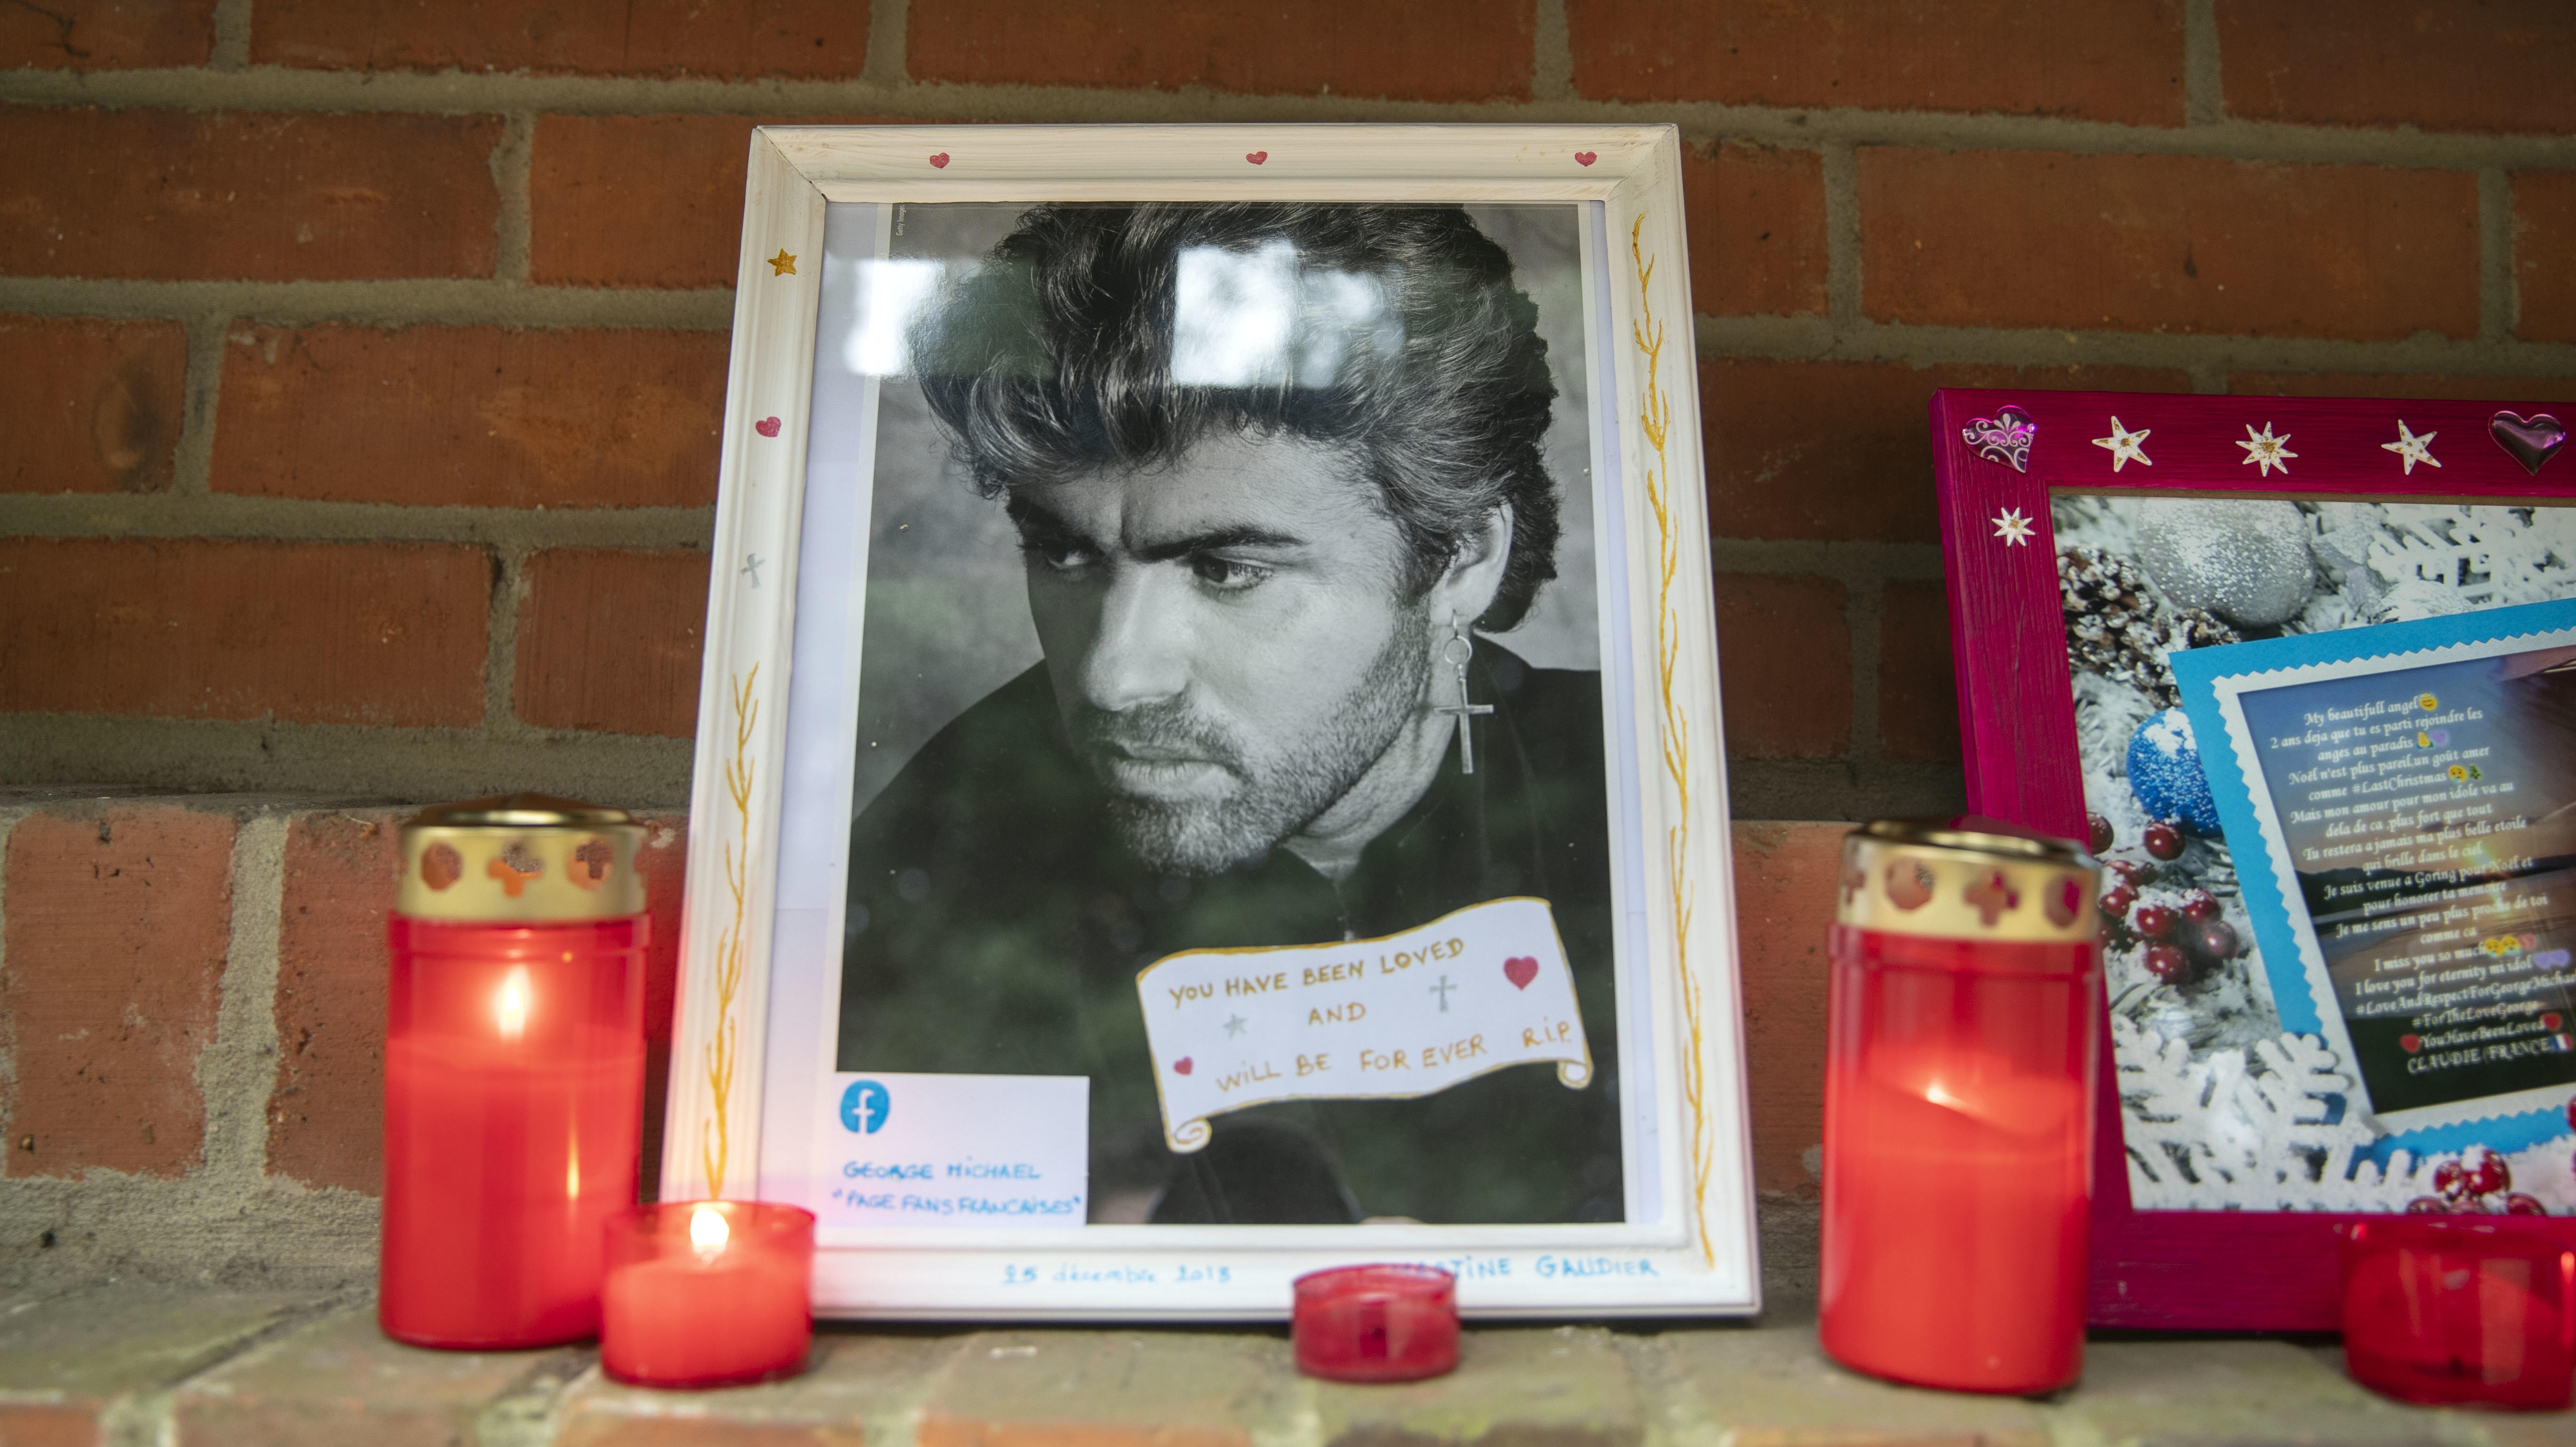 Sister of George Michael dies exactly 3 years later